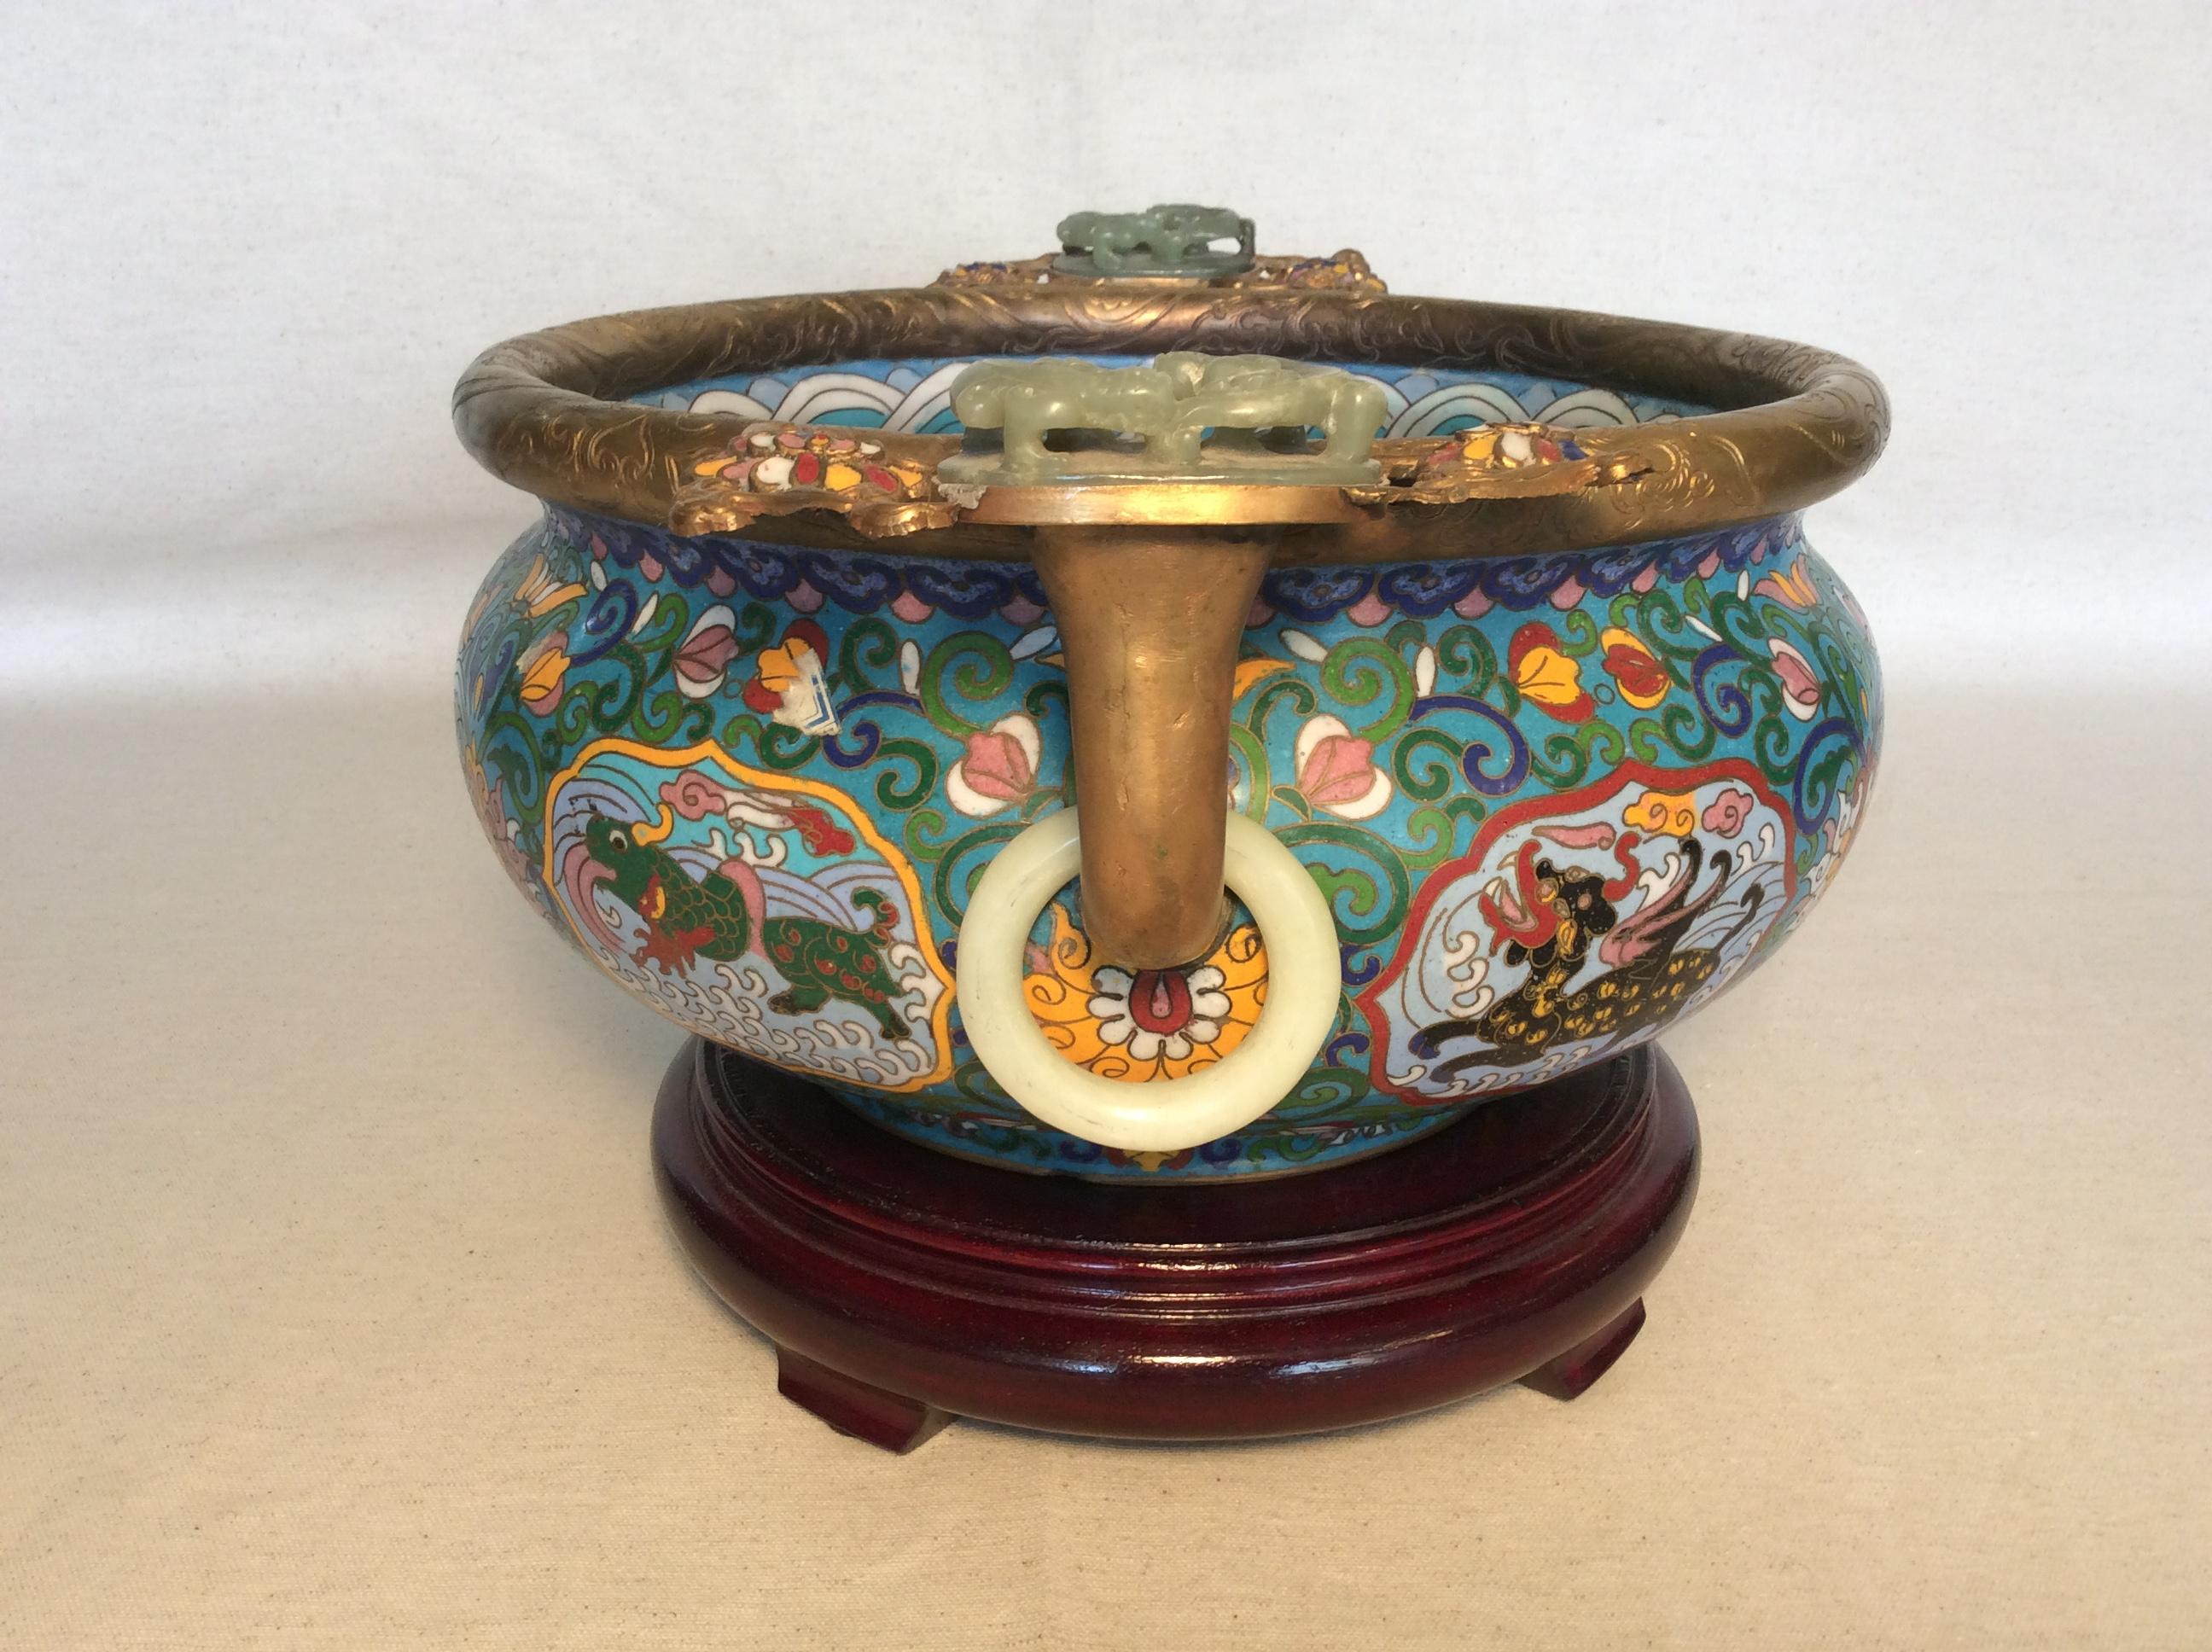 Antique Cloisonné Bowl featuring hand painted dragons inside and out, adorned with jade on the handles.
Chinese parcel gilt, cloisonné censer, mounted with a pair of Qing dynasty, pale celadon nephrite, high relief, double qilong plaques, with